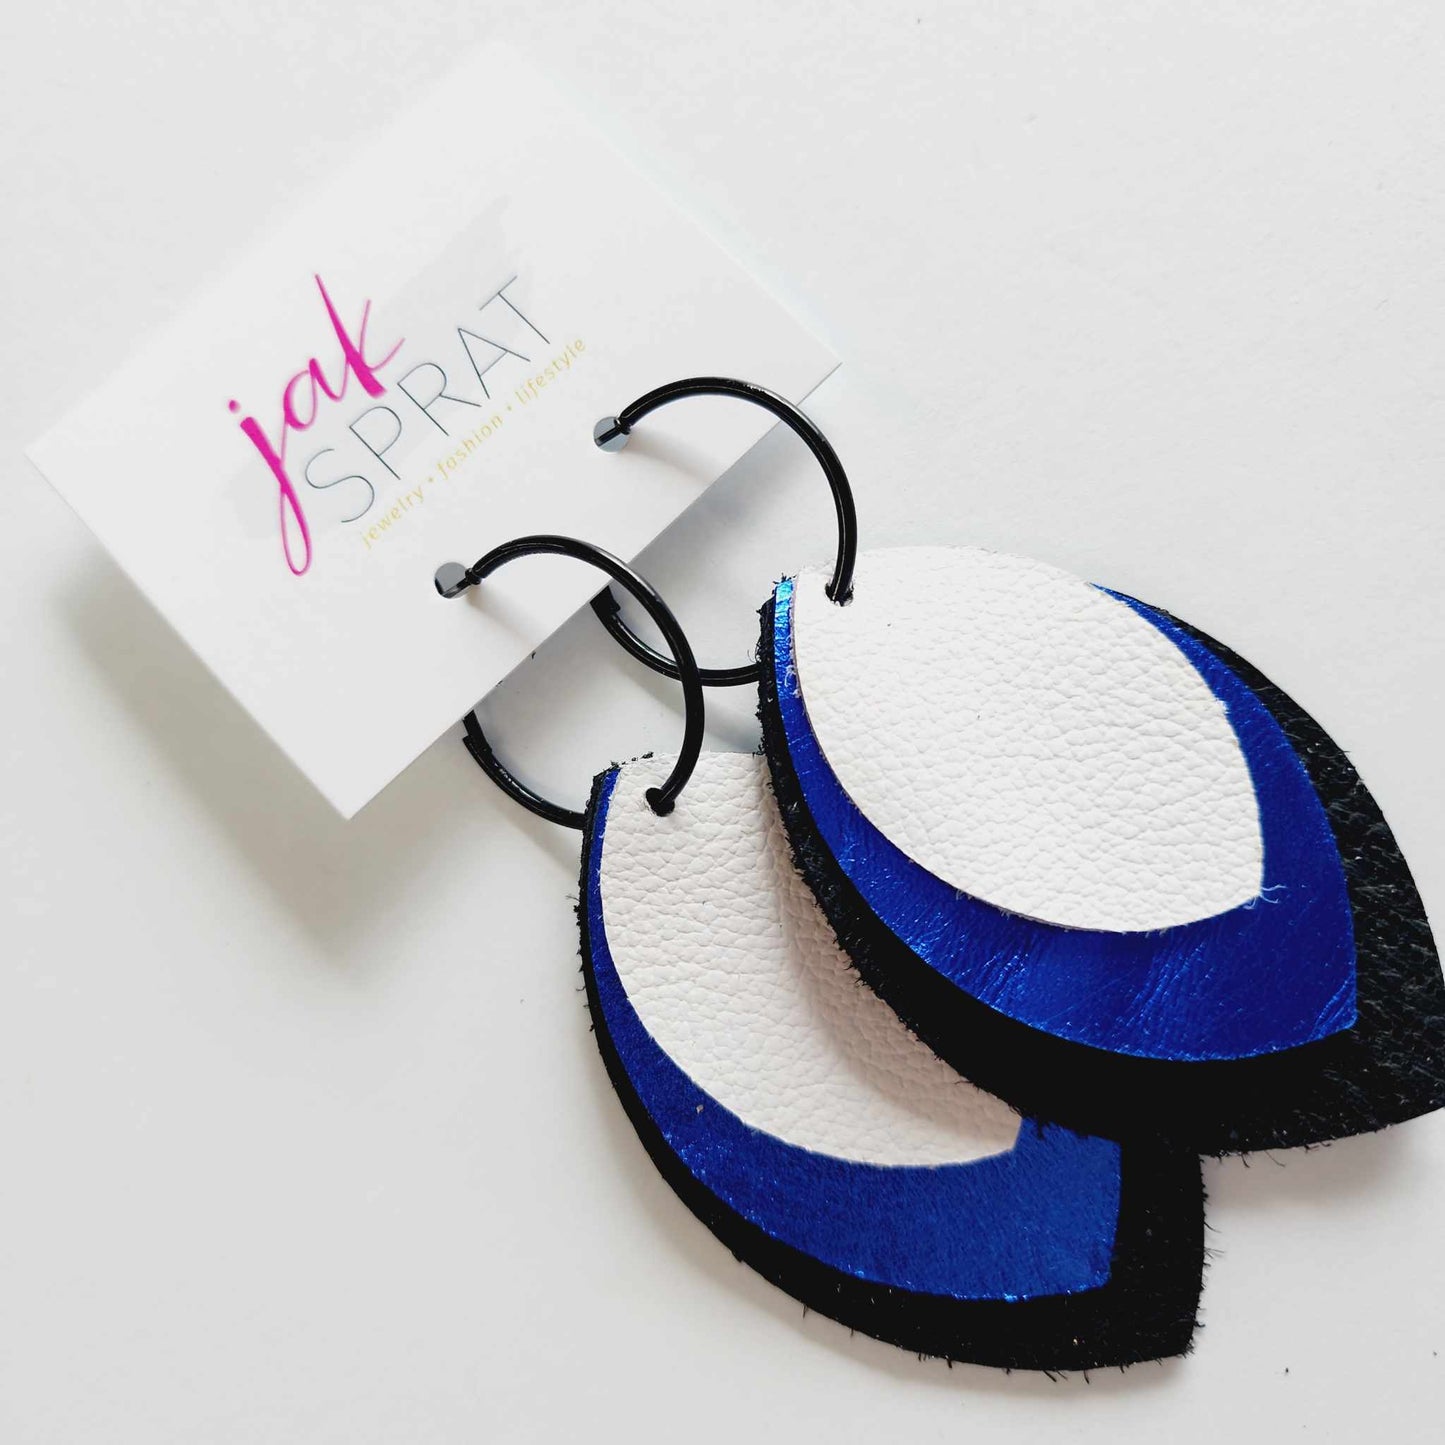 Boujee at the Ball Field- Black & Royal Blue & White